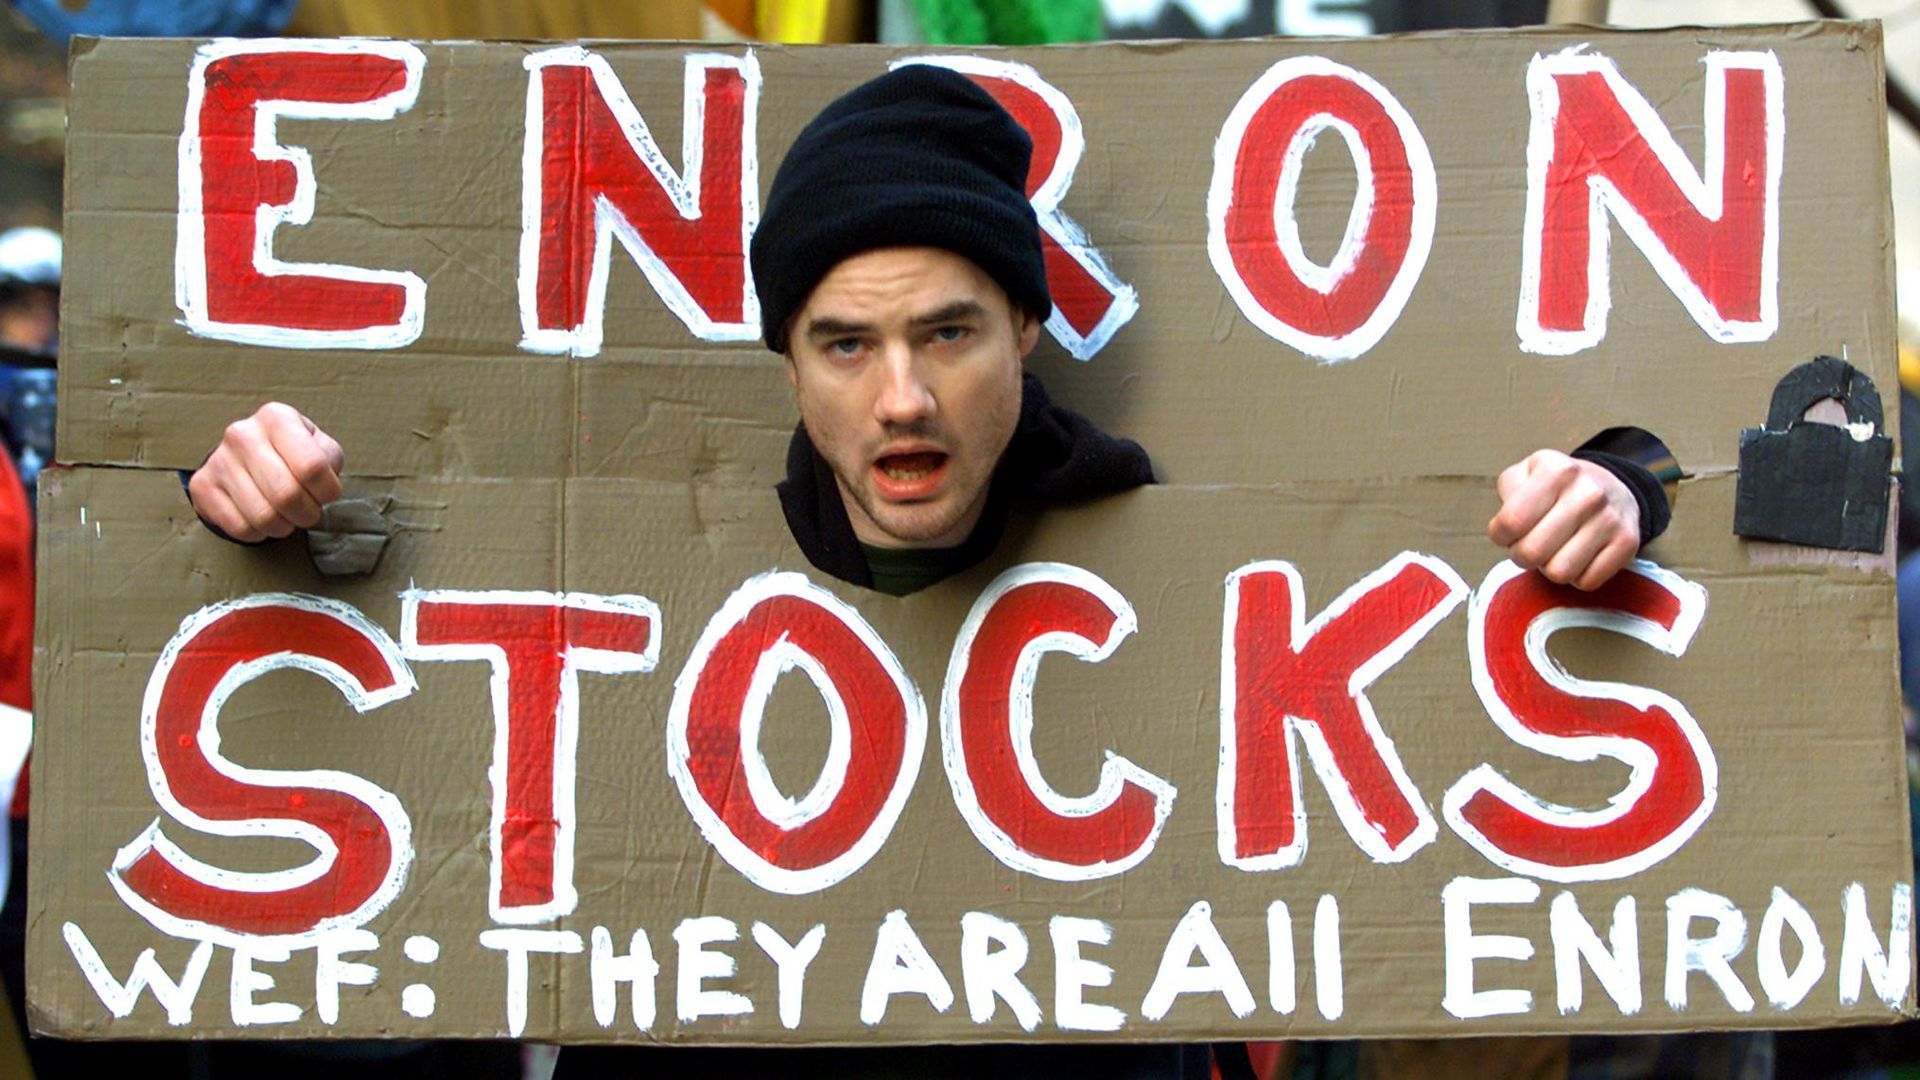 A demonstrator protests against the World Economic Forum and the Enron scandal in February 2002. The scandal stoked public outrage over the stock market. (PAUL J. RICHARDS/AFP via Getty Images)